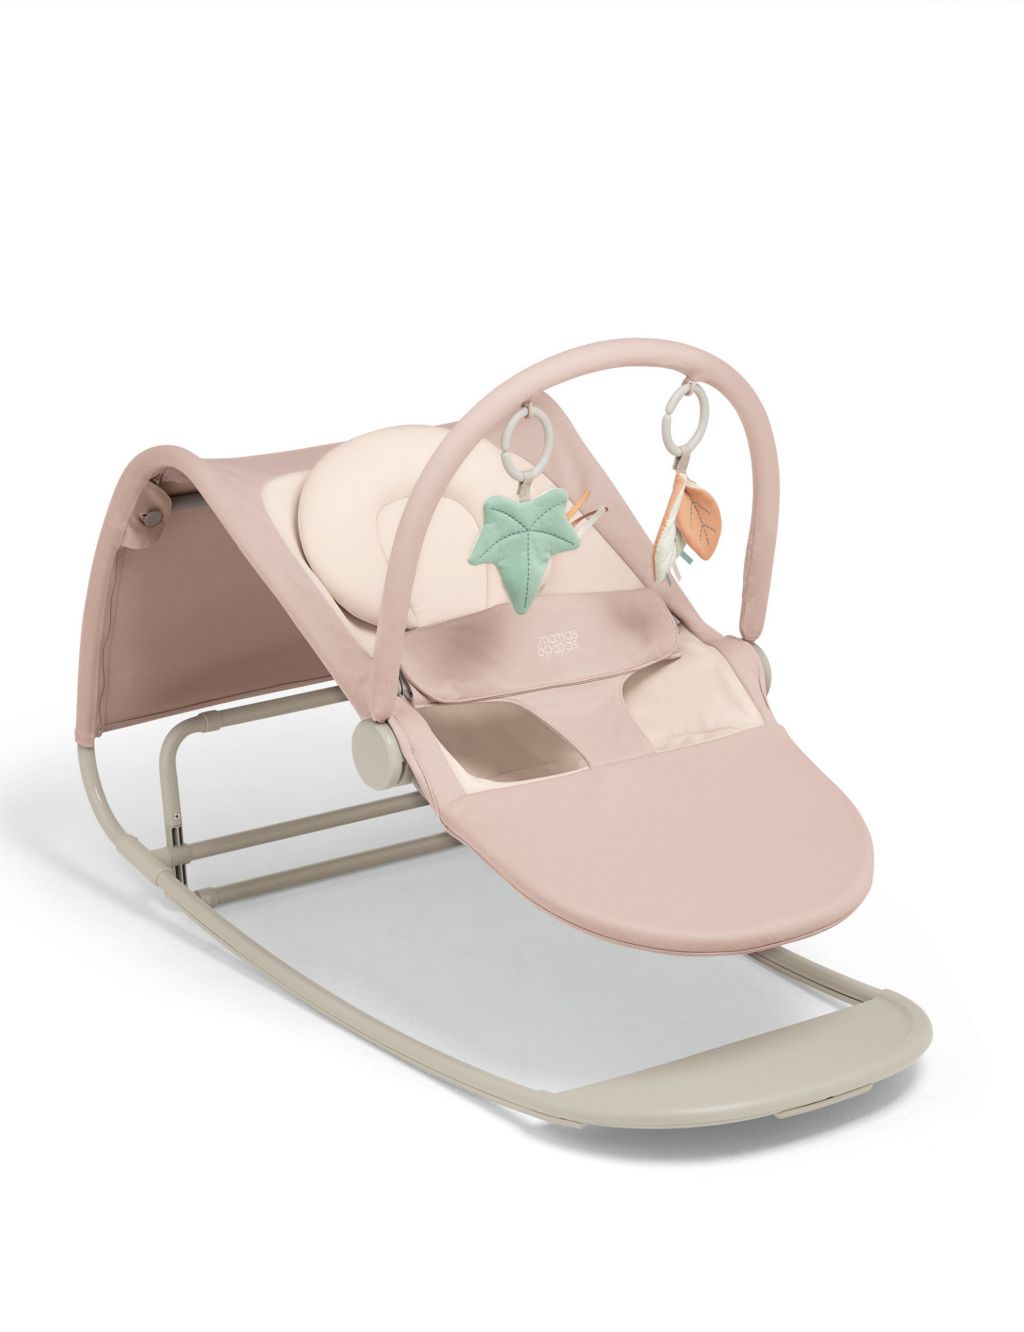 Tempo 3-in-1 Rocker Ivy Bouncer image 4